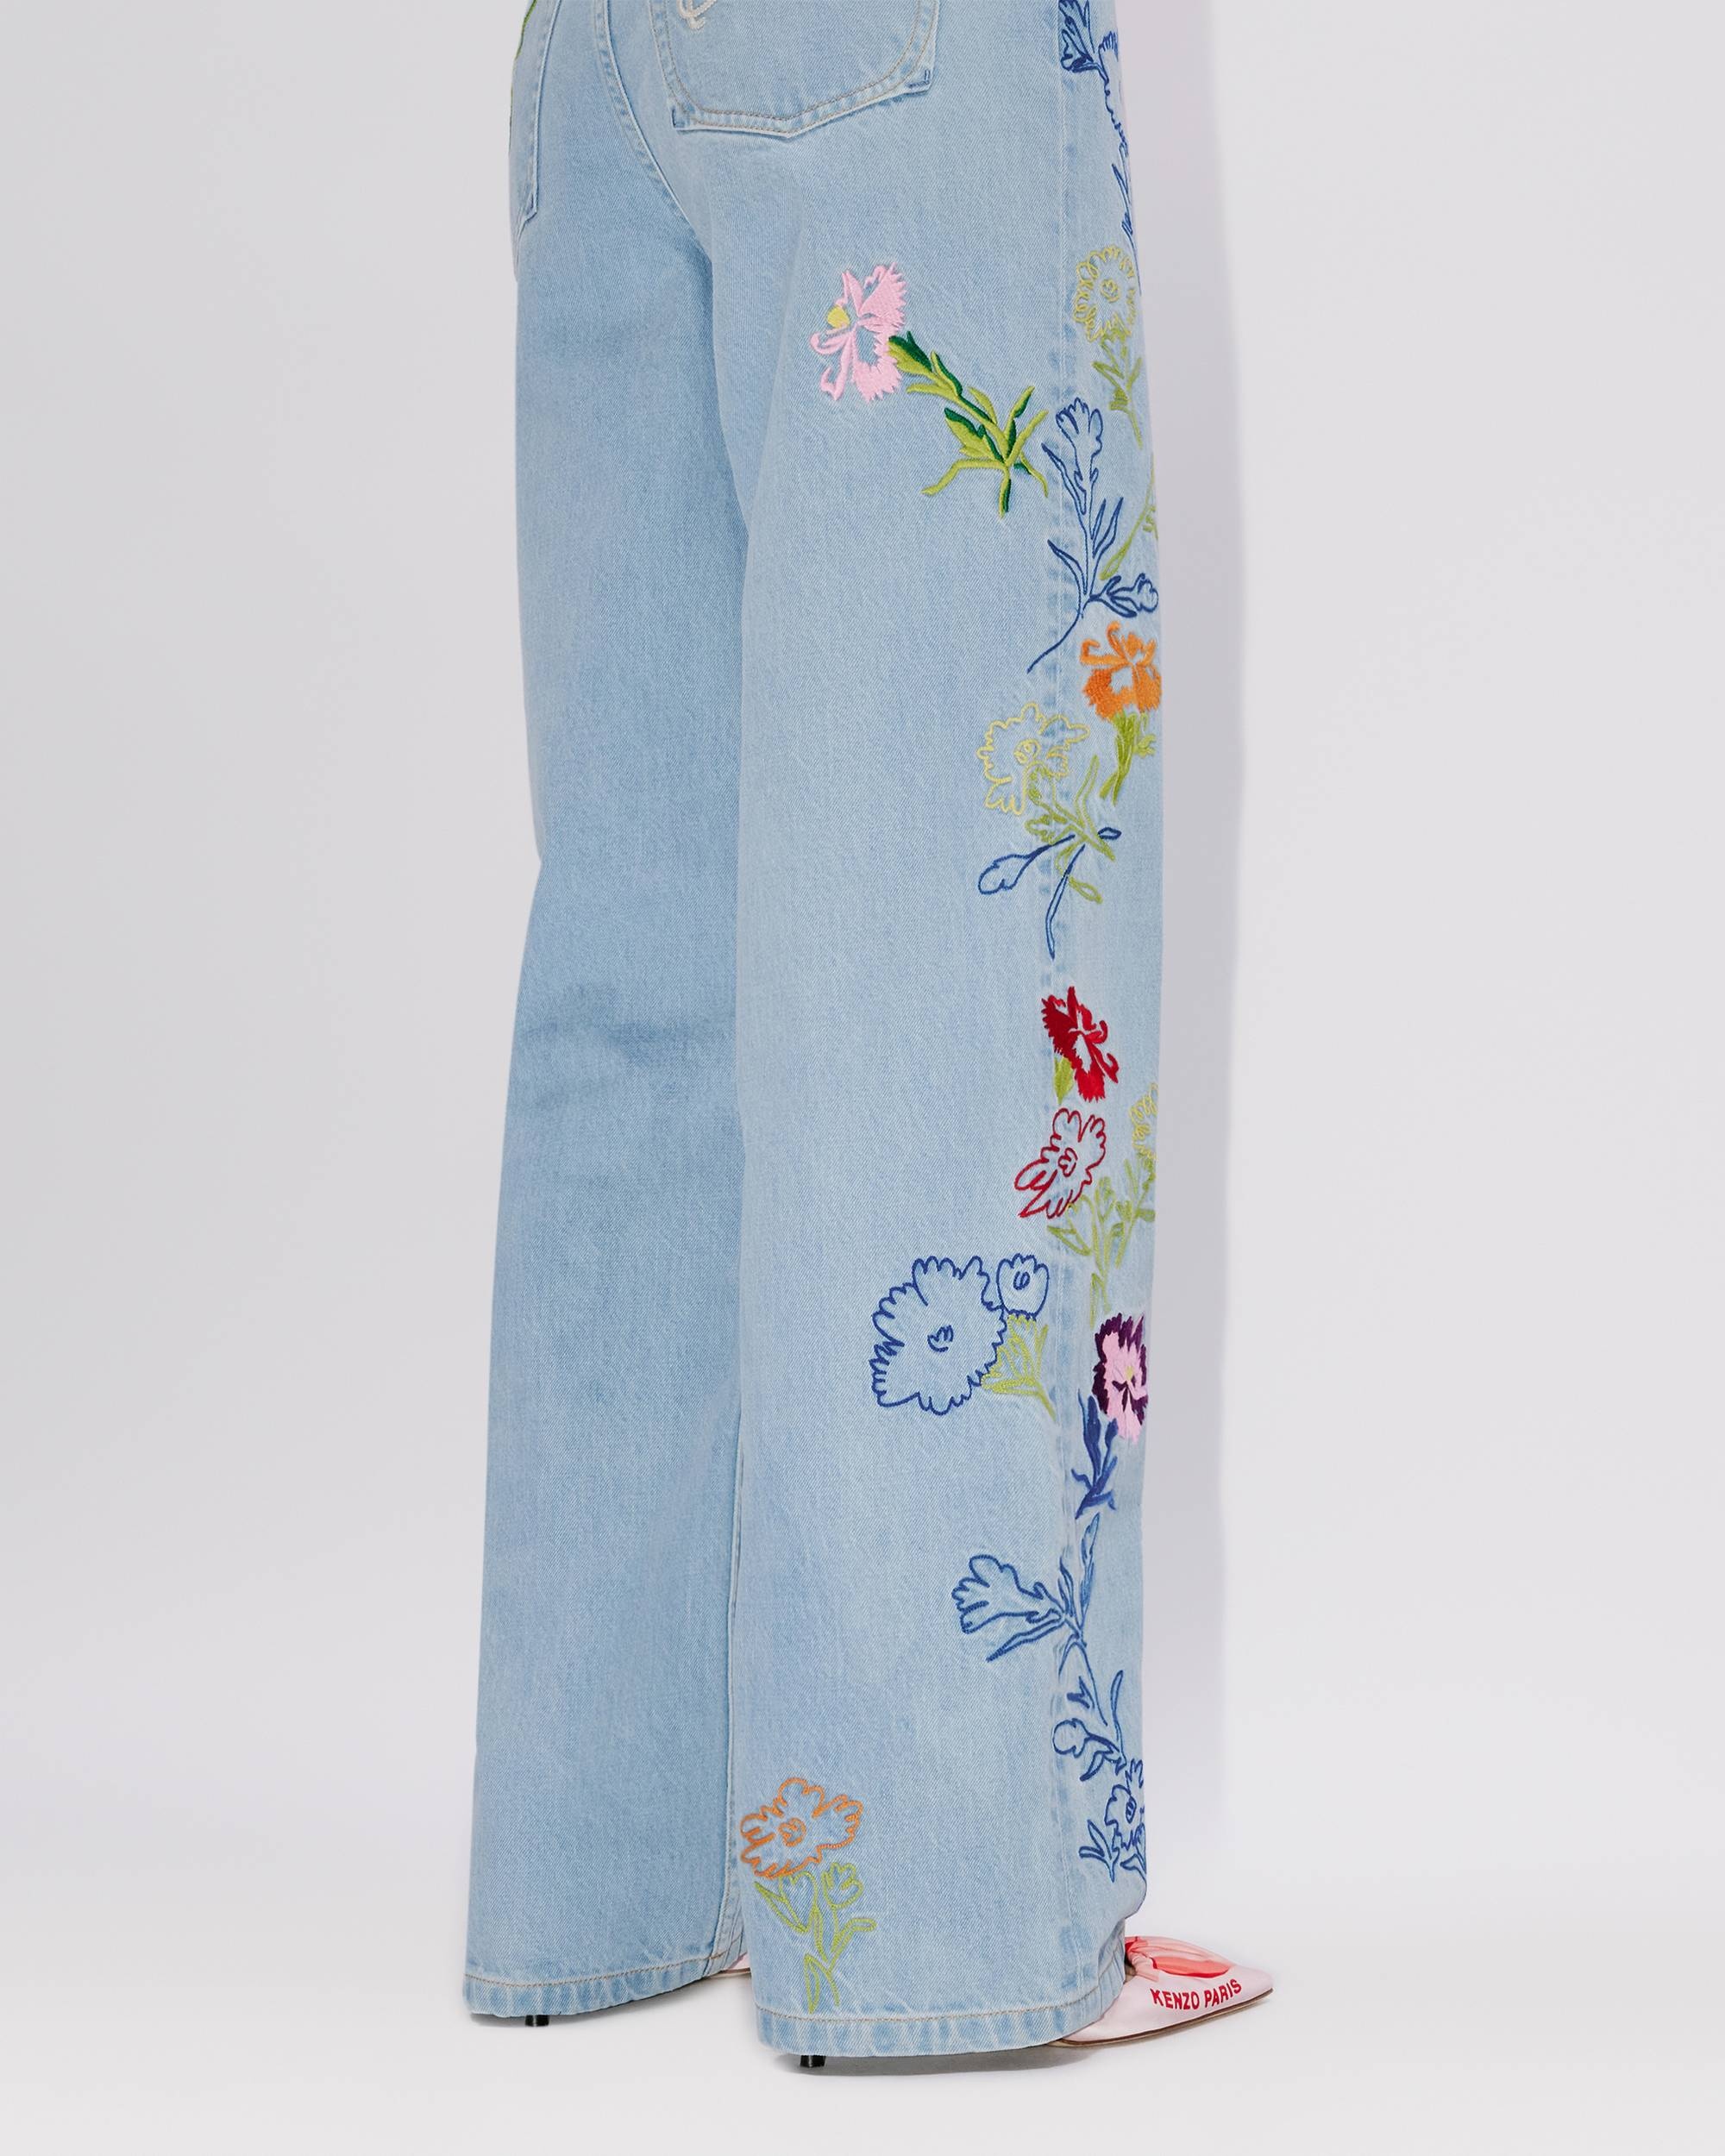 'KENZO Drawn Flowers' AYAME embroidered jeans - 6